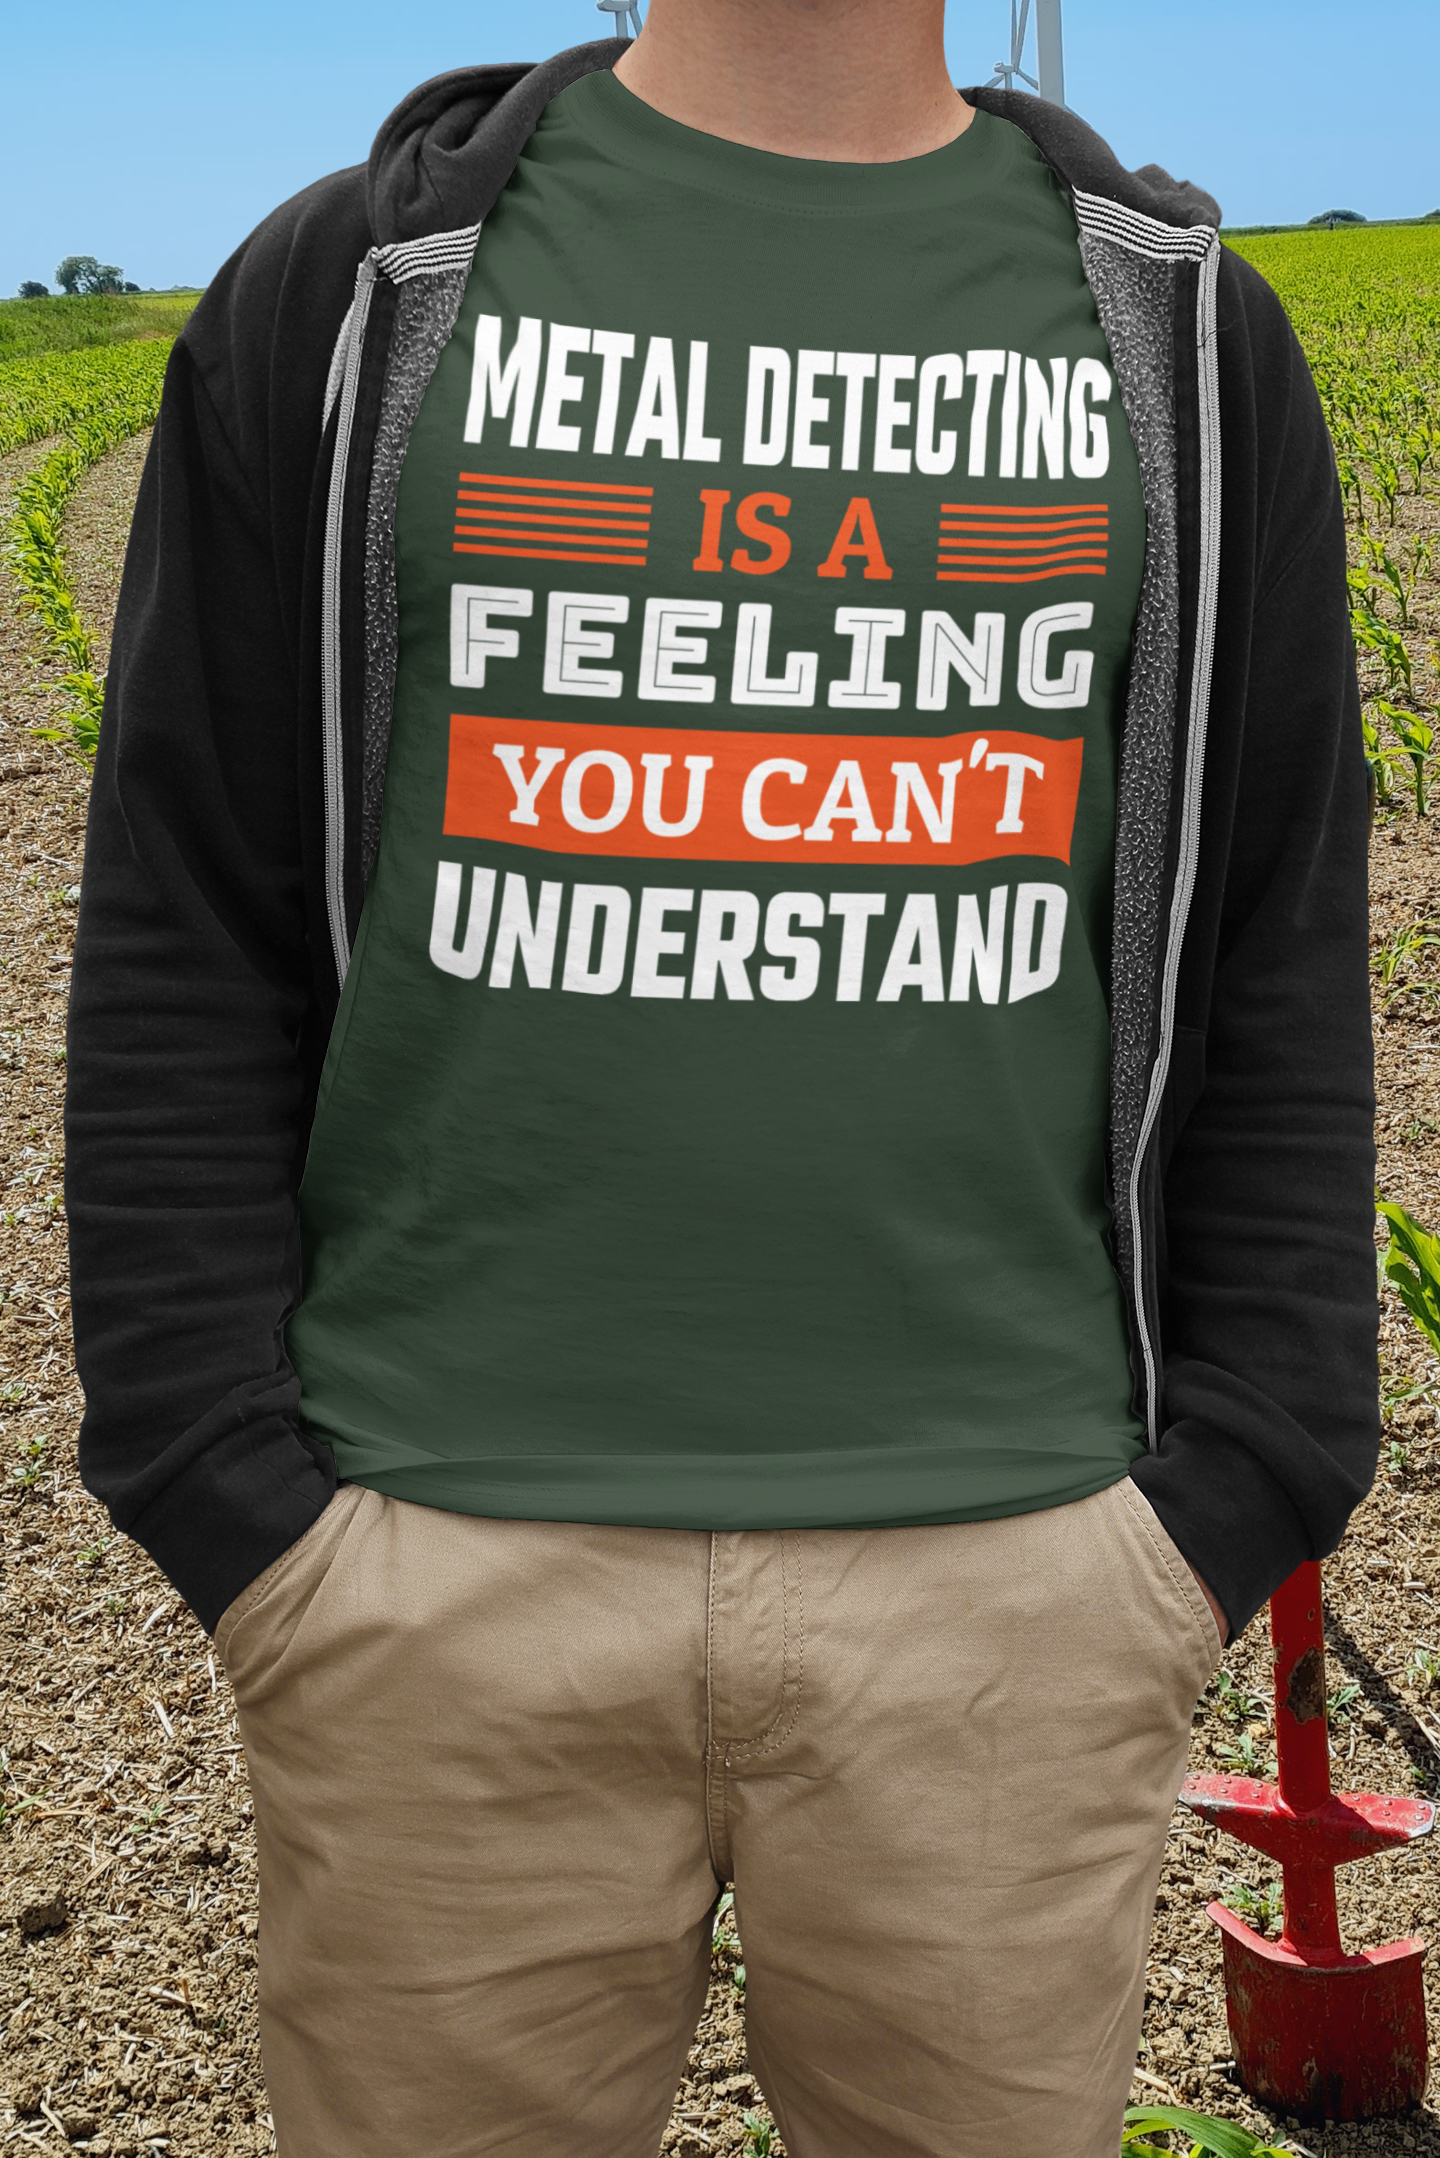 Metal detecting is a feeling you can't understand